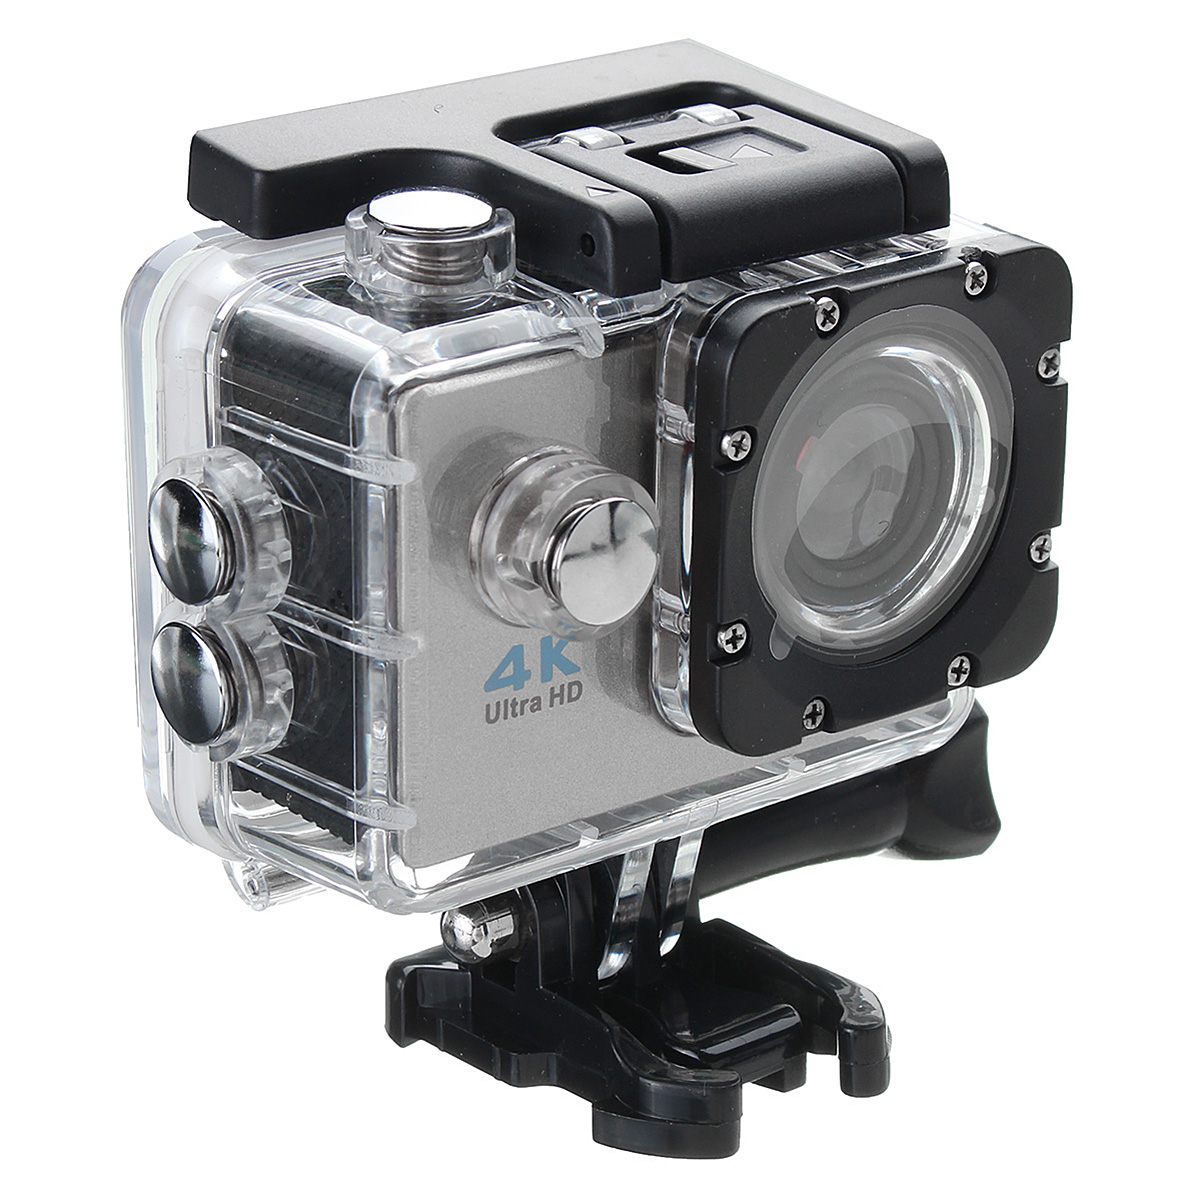 1080P-16MP-WIFI-HD-Sports-DV-Action-Camera-Waterproof-Video-Camcorder-1208511